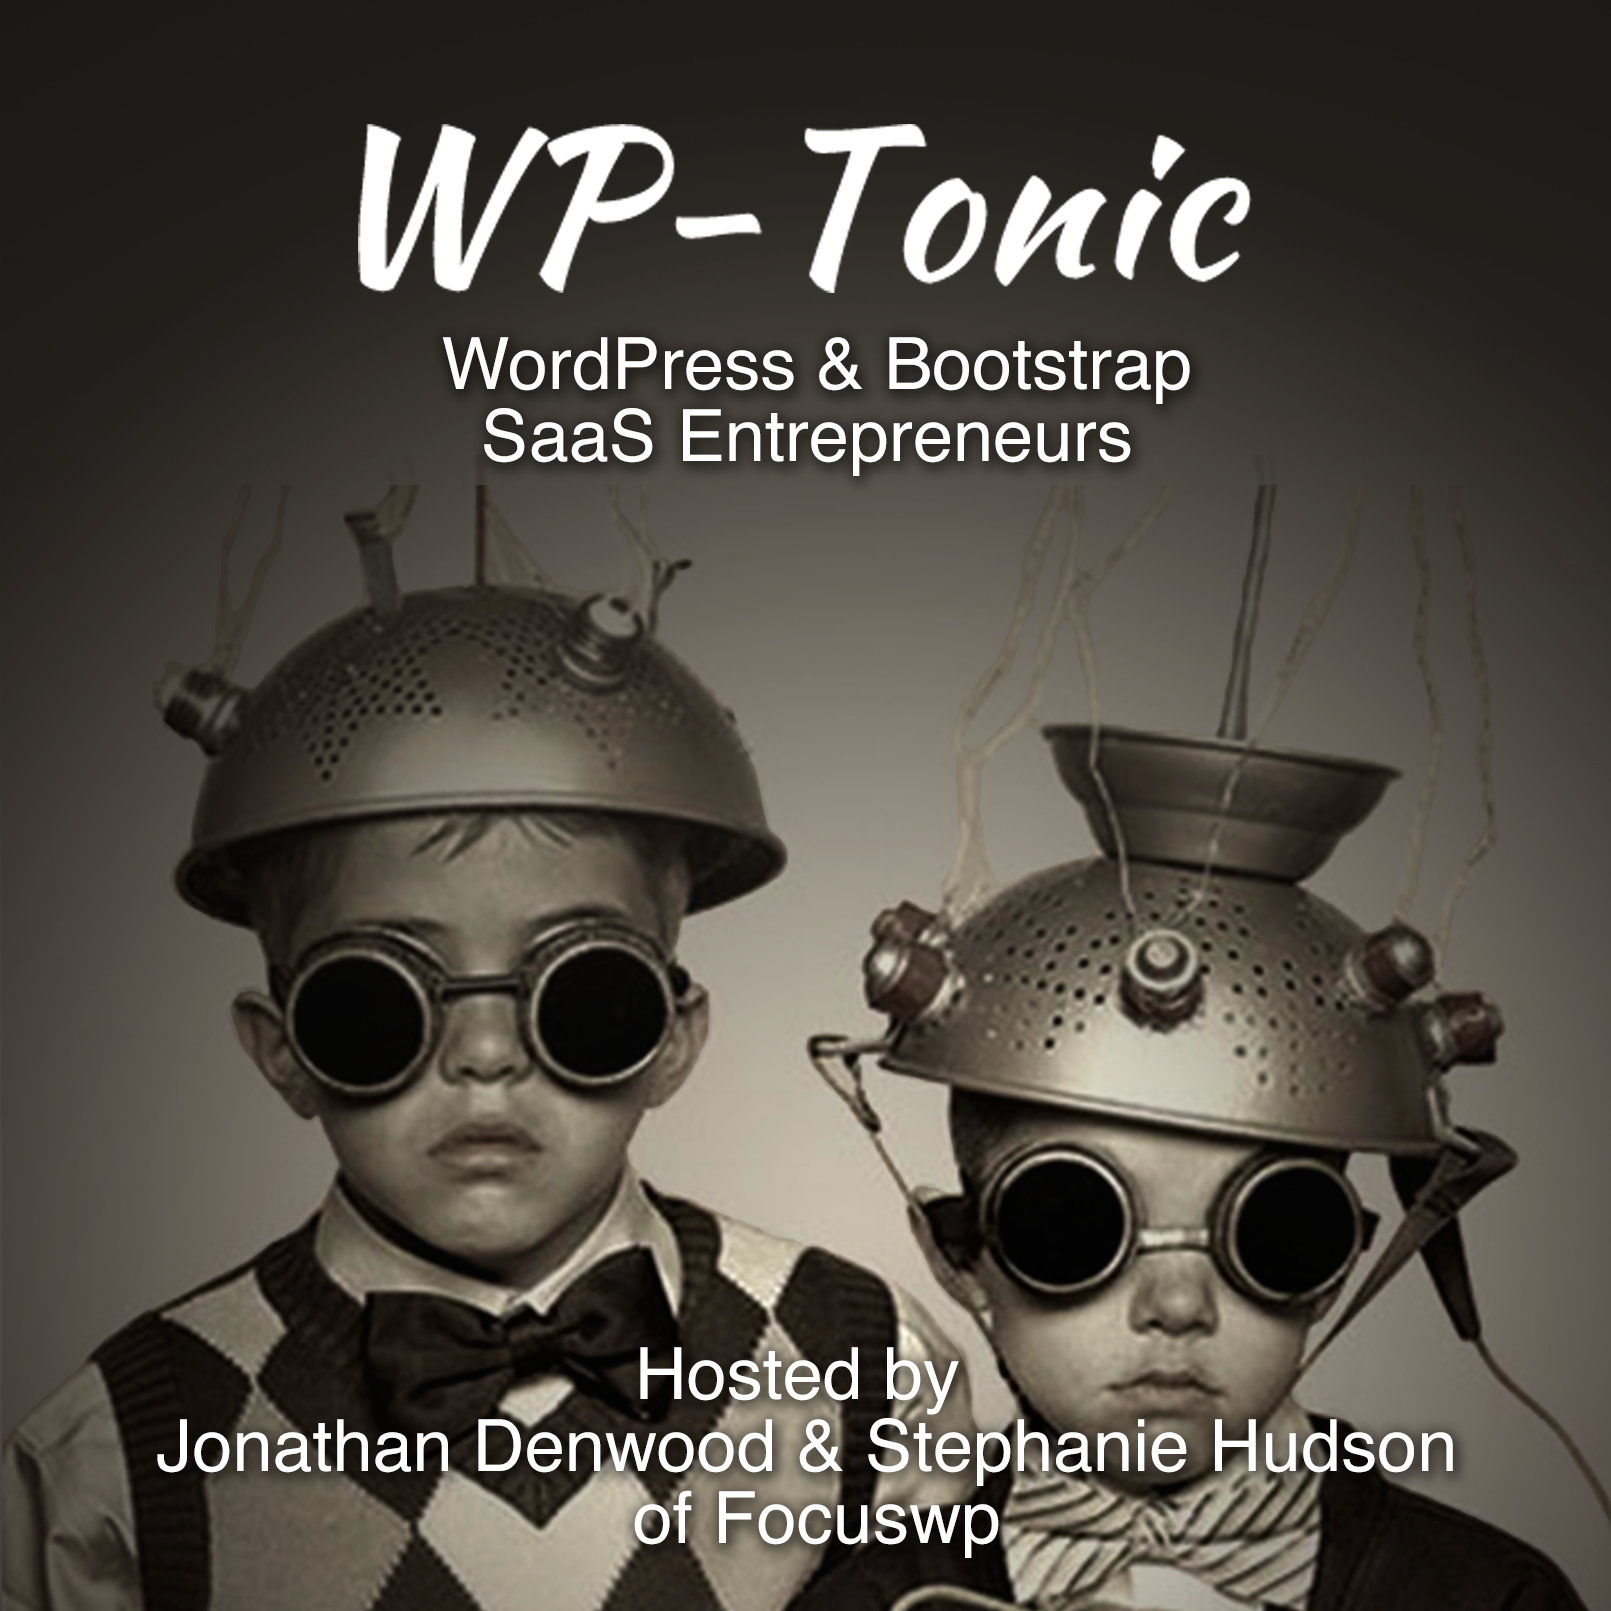 #602  WP-Tonic Round-Table Show on Friday, 11th of June, 2021 at 8:30 am PST